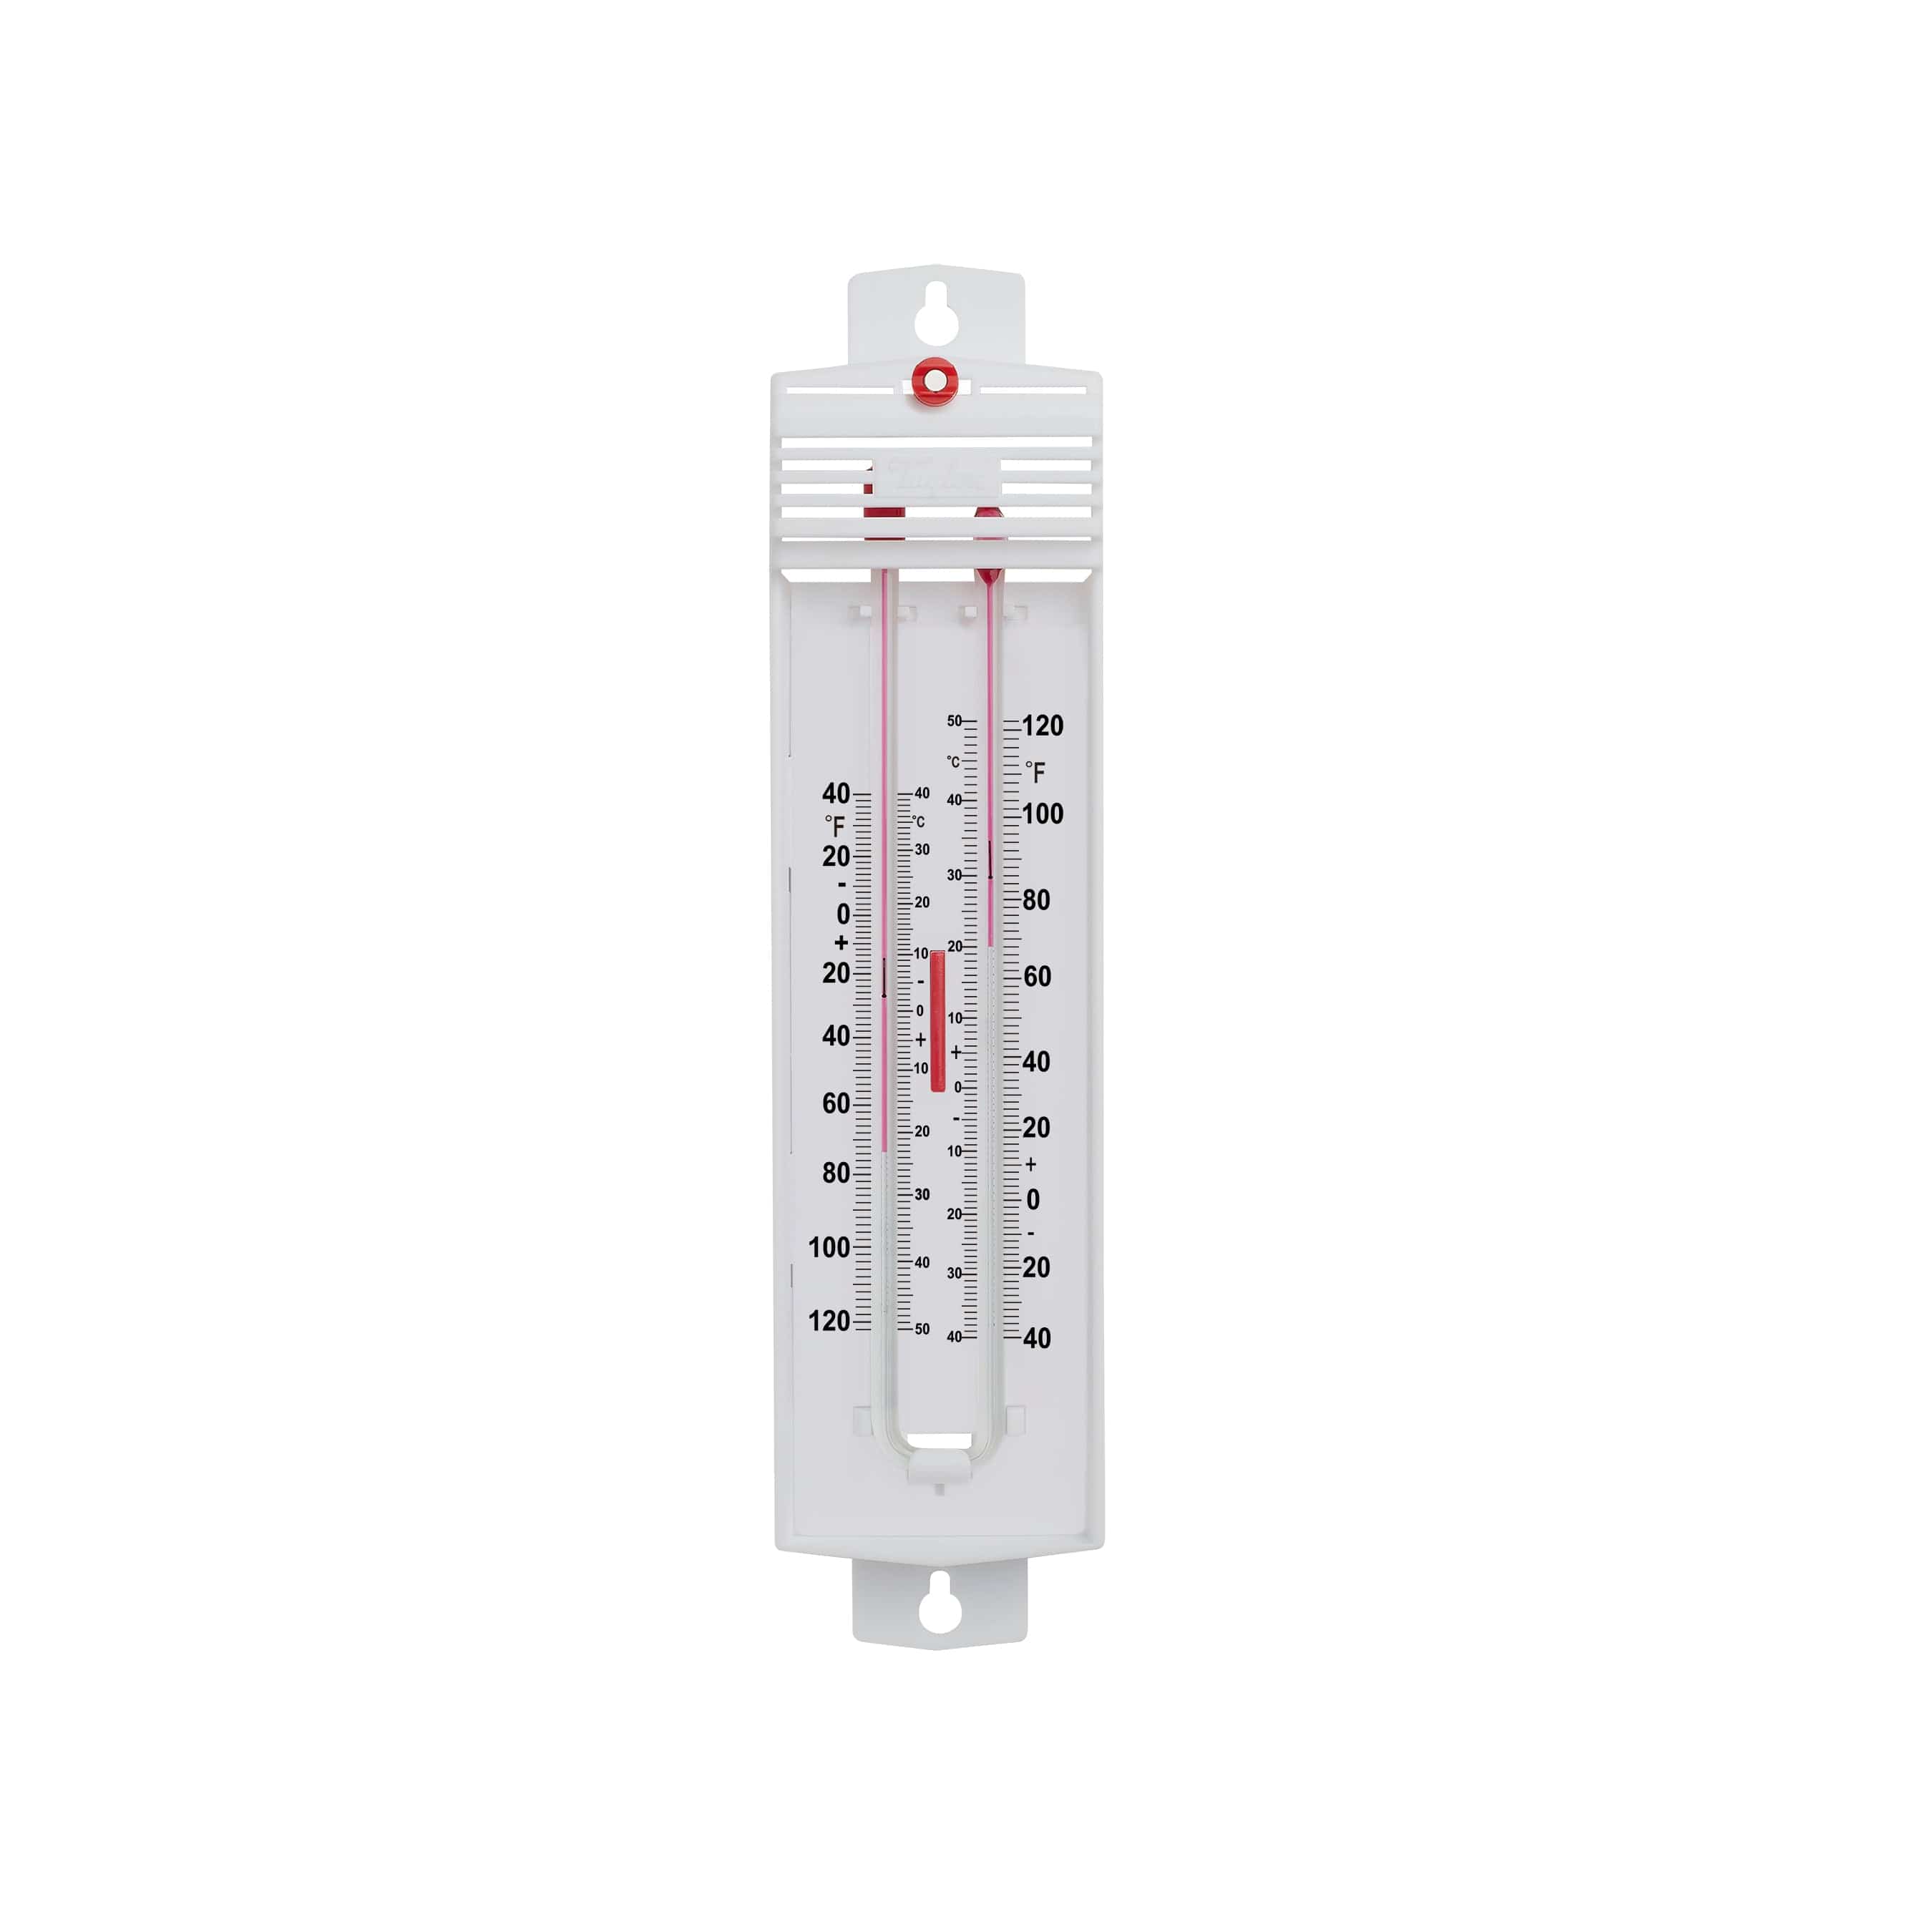 Trend frontier Min-Max Thermometer, outside thermometer